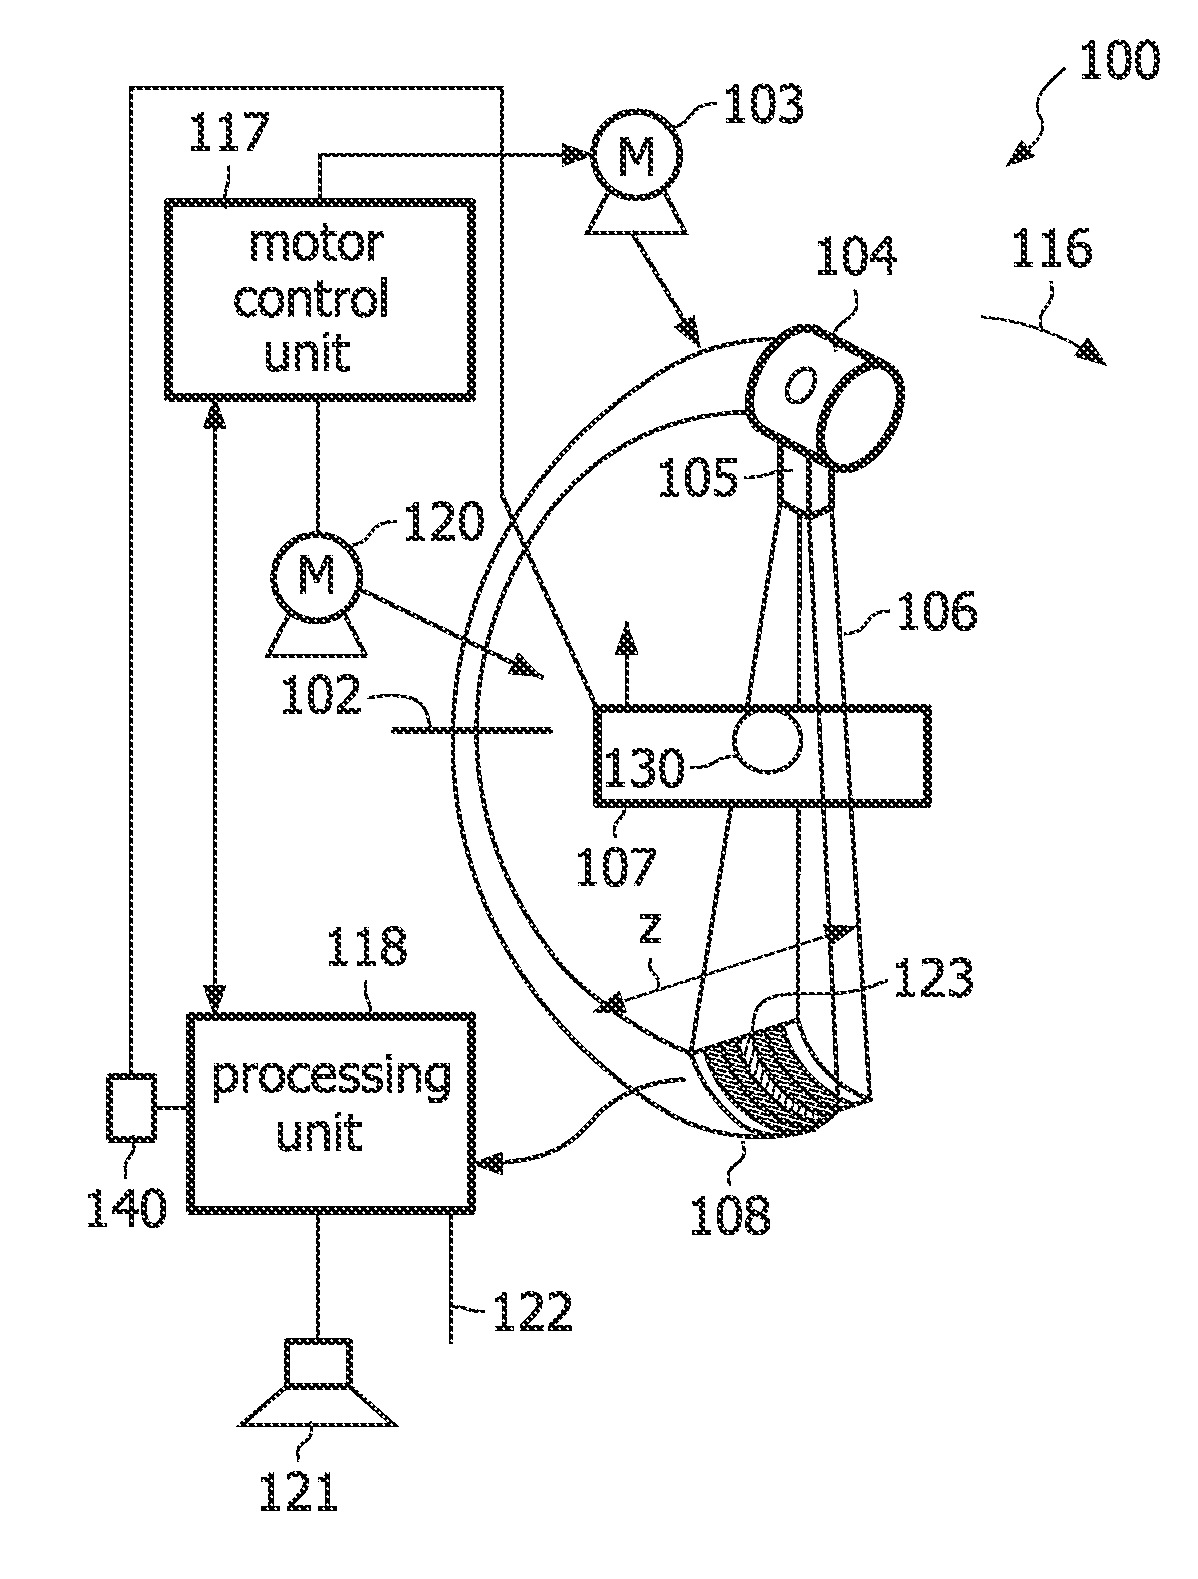 Computer tomography (CT) c-arm system and method for examination of an object